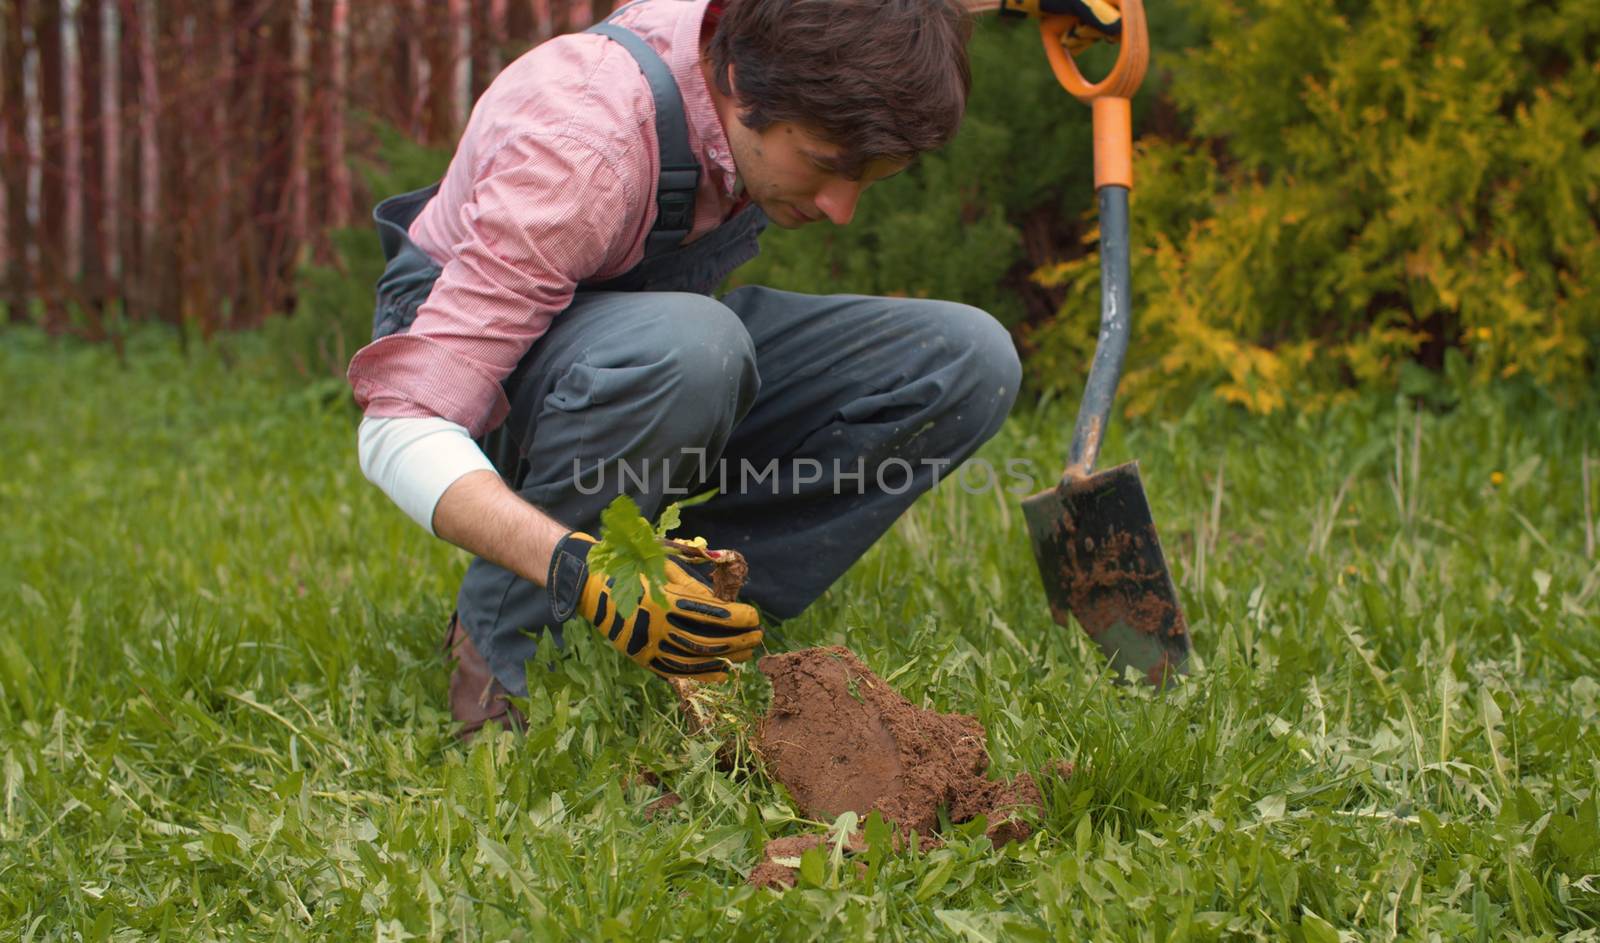 Gardener digging ground on a lawn in the yard by Alize